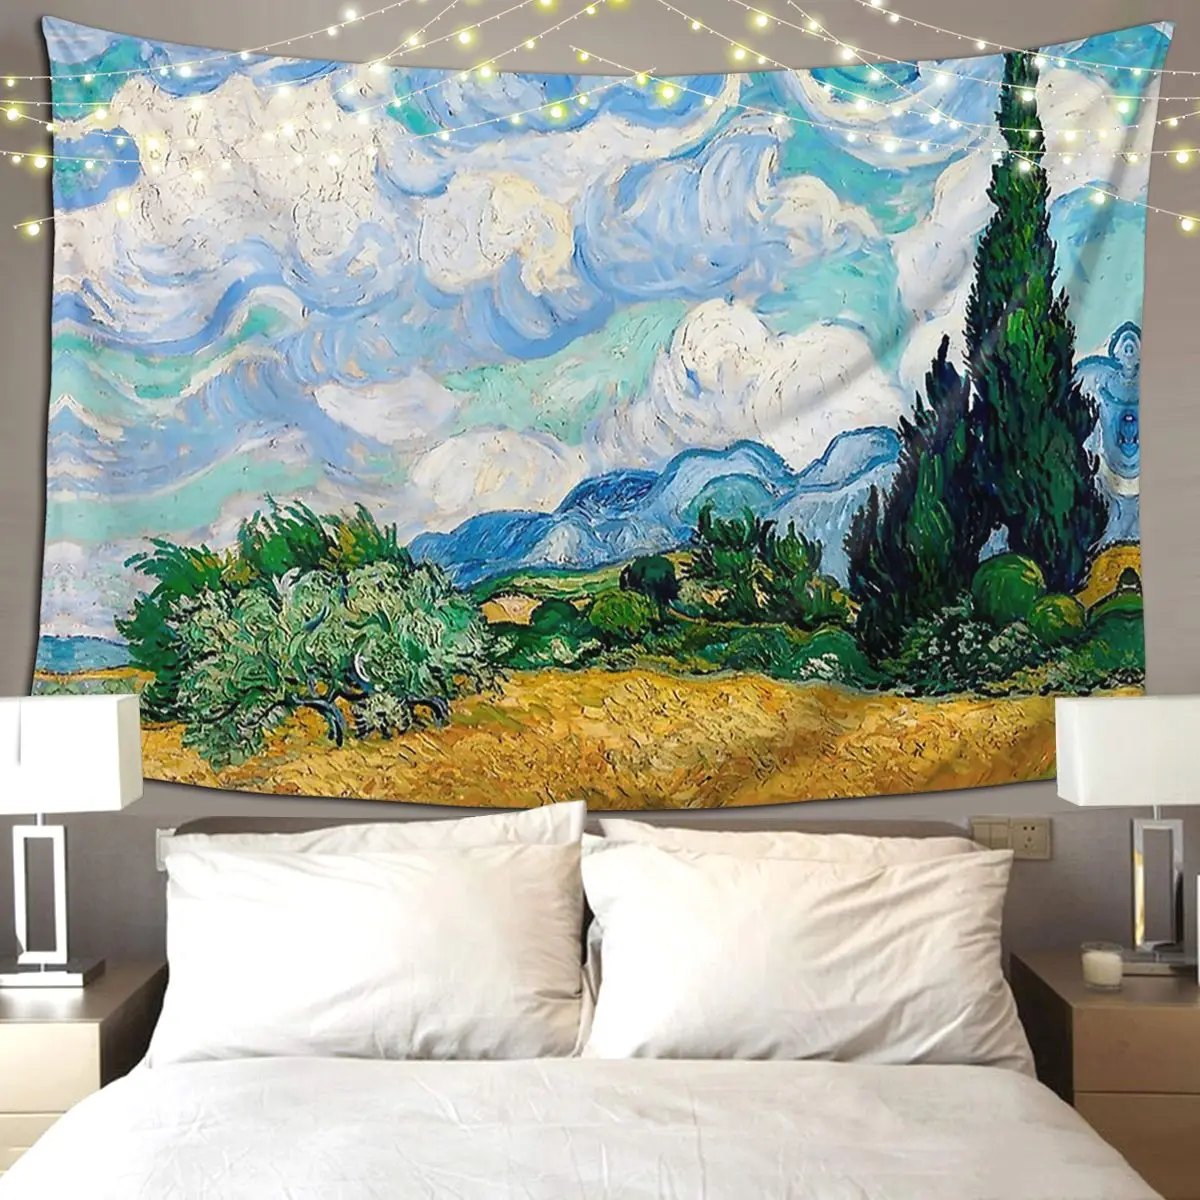 

Wheat Field With Cypresses By Vincent Van Gogh Tapestry Funny Wall Hanging Home Tapestries for Living Room Bedroom Dorm Room